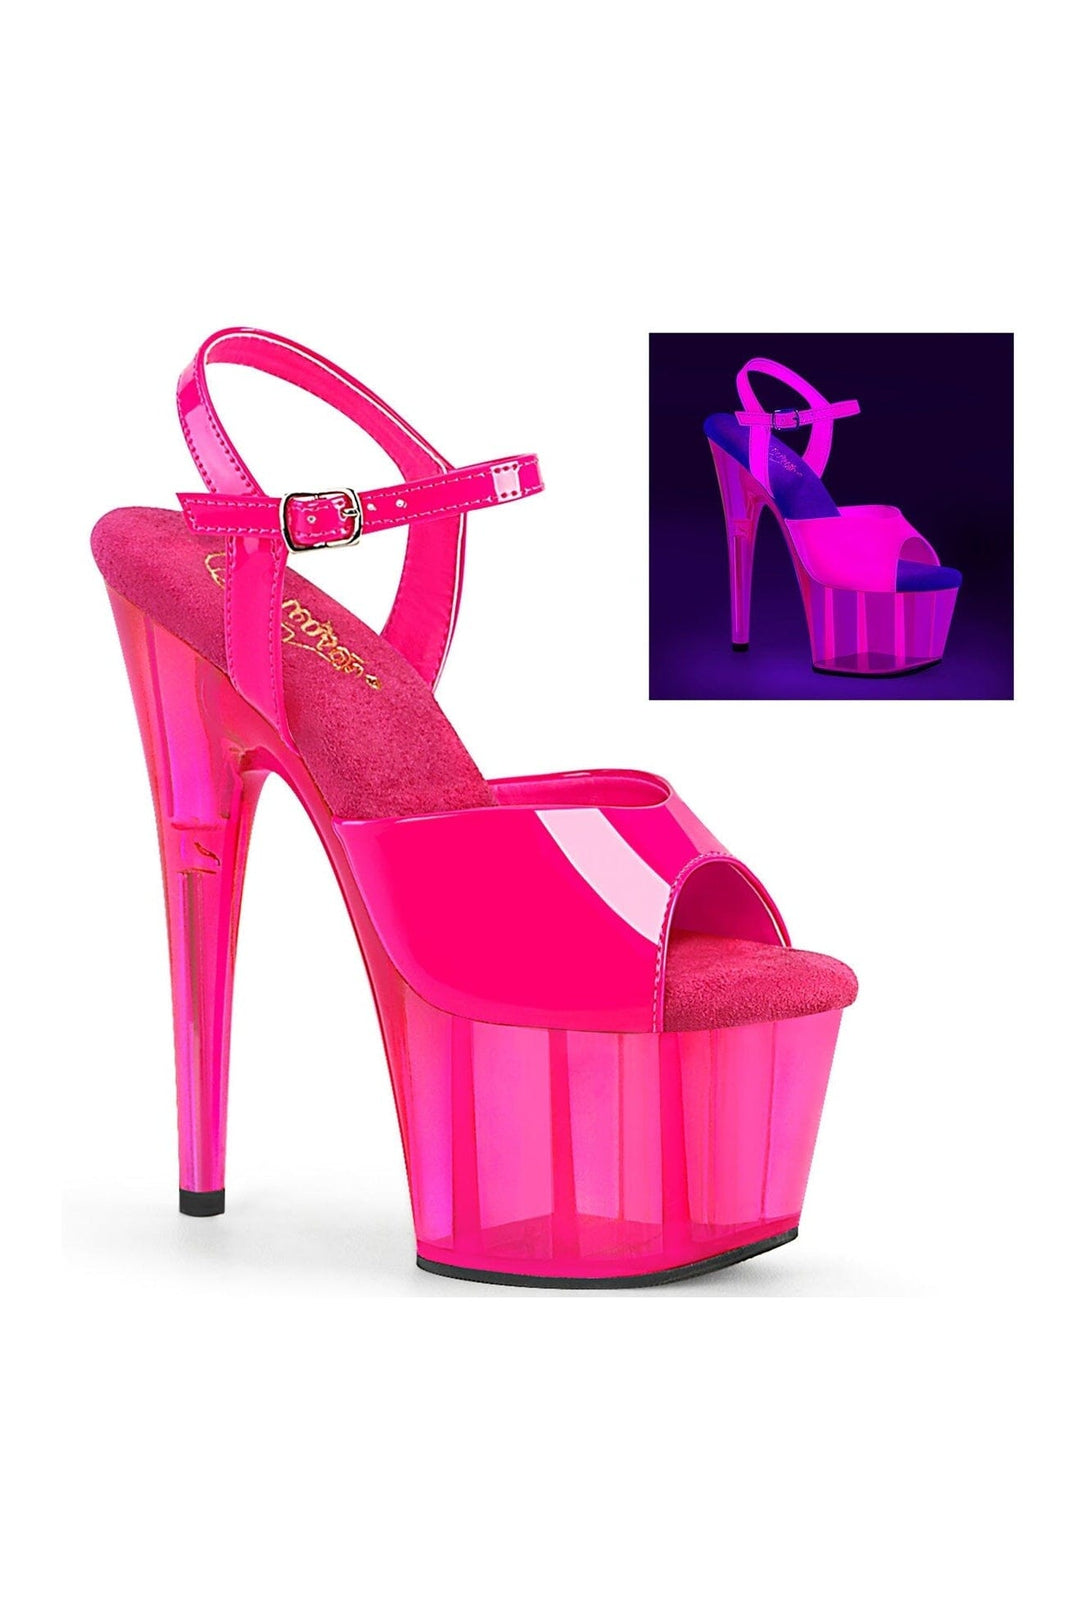 Pleaser Fuchsia Sandals Platform Stripper Shoes | Buy at Sexyshoes.com